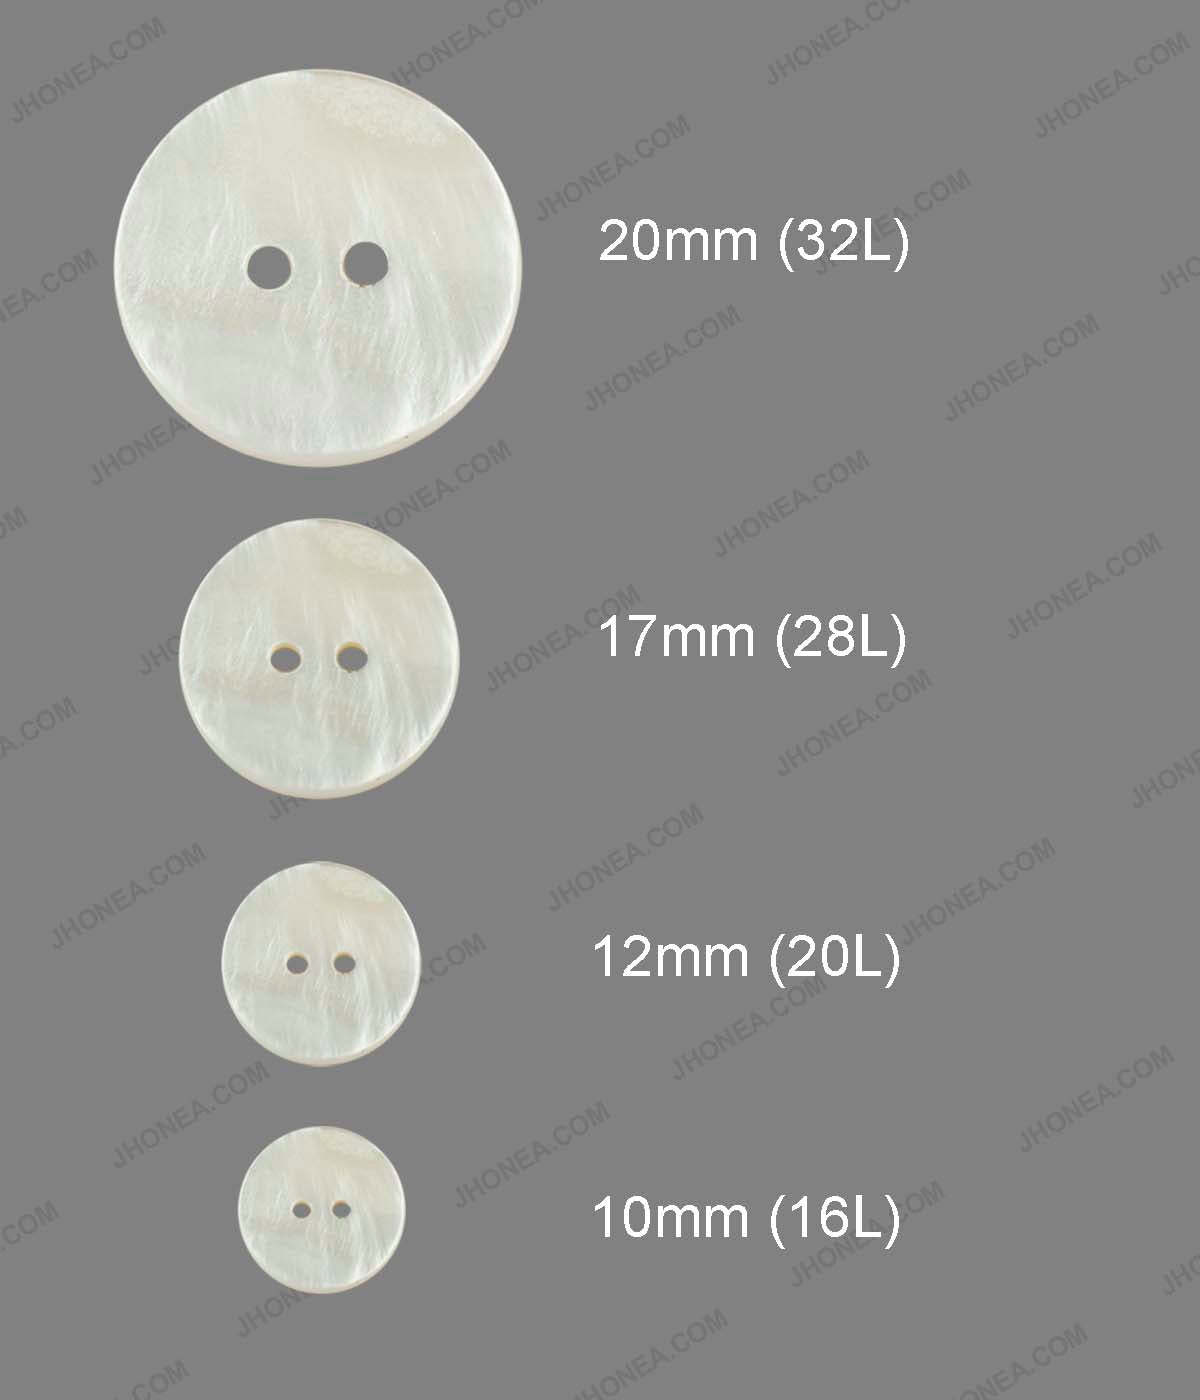 Glossy & Shiny Pearlescent White Shirt Buttons for Shirts/Blazers in White Color